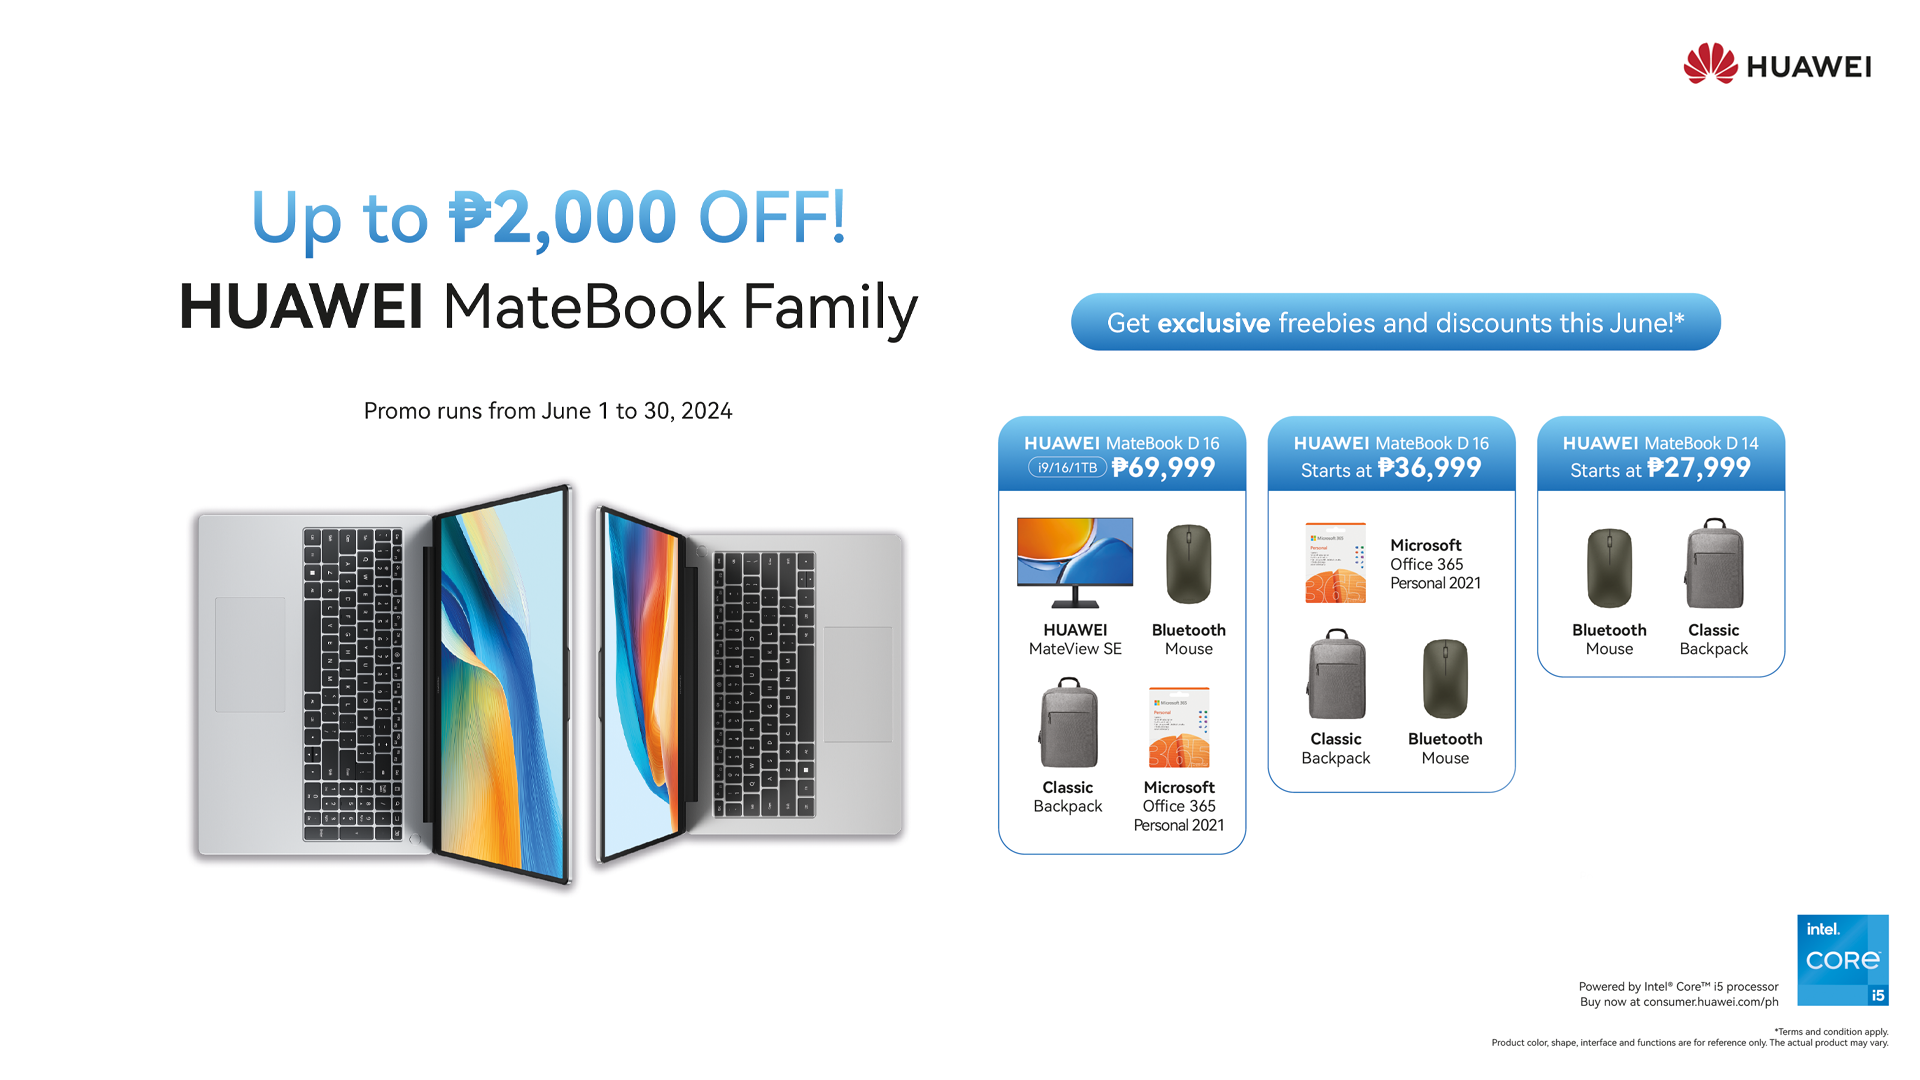 Empower Creativity, Experience Excellence: HUAWEI Deals and Discounts for MateBook Family Laptops